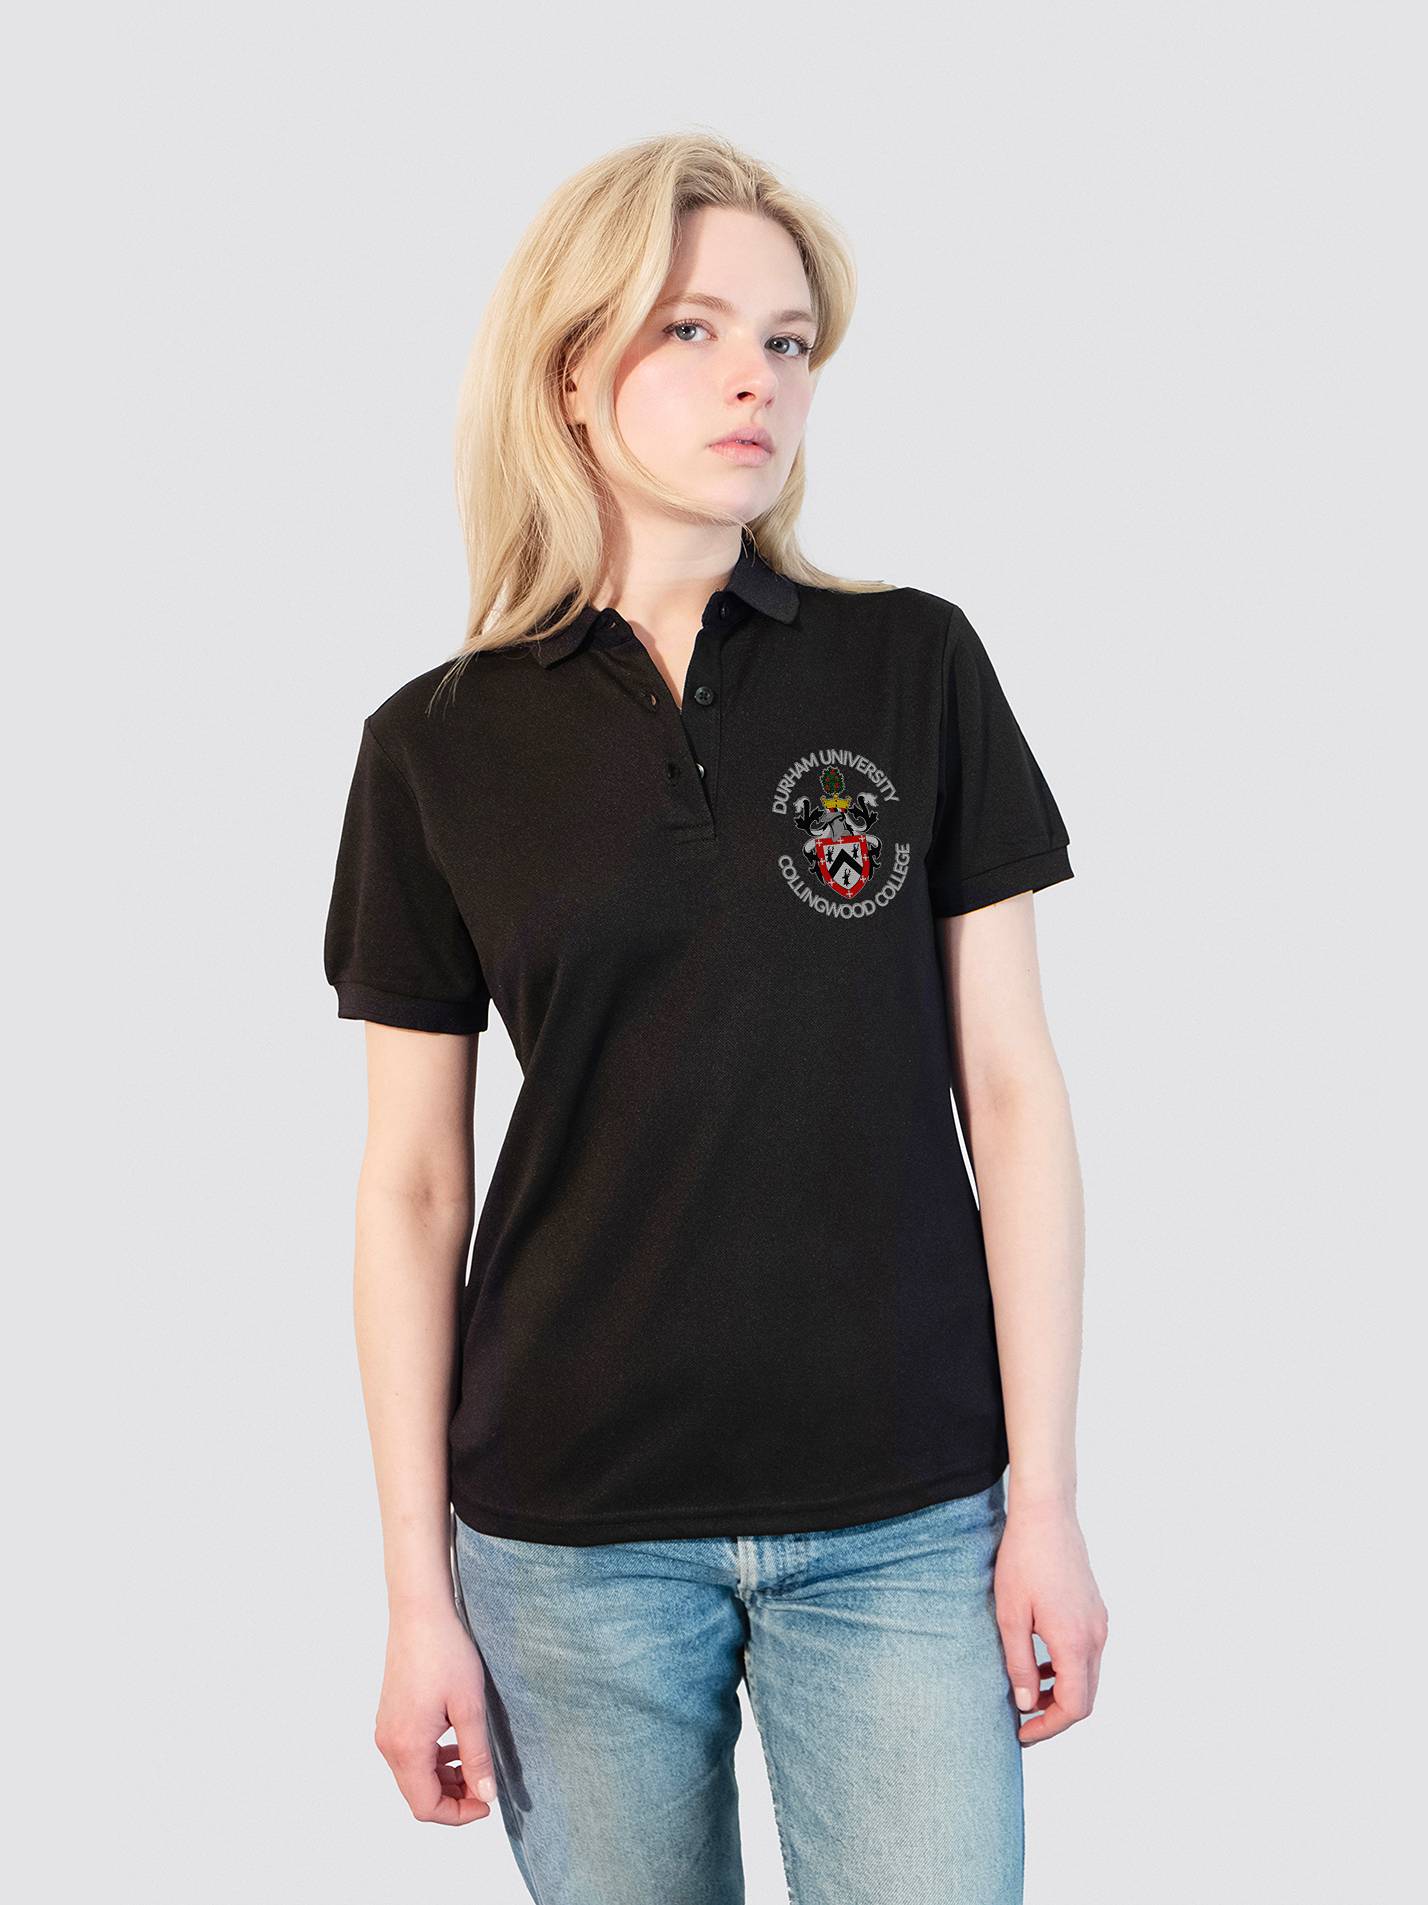 Collingwood College Durham Sustainable Ladies Polo Shirt